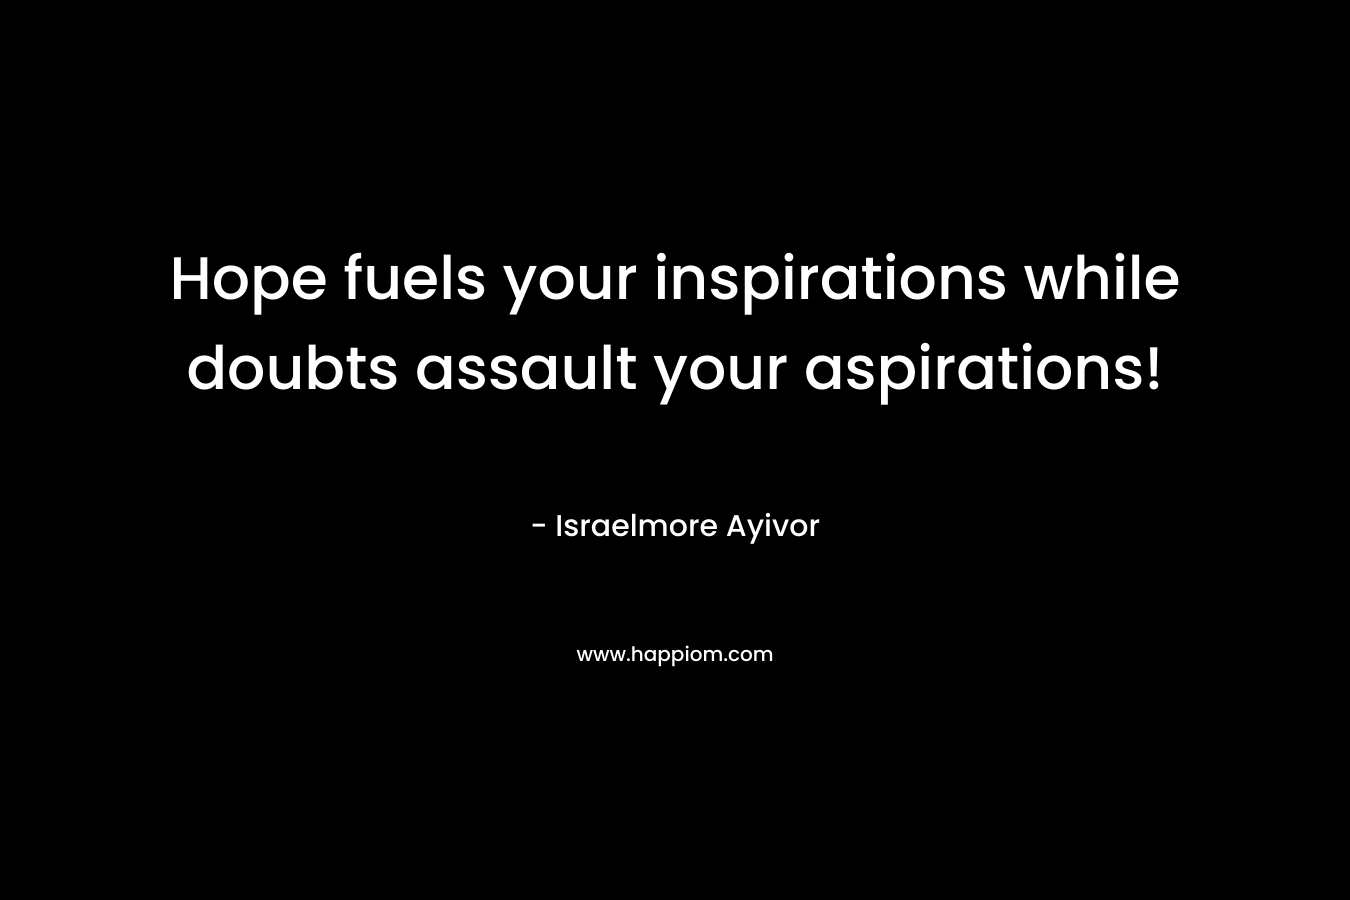 Hope fuels your inspirations while doubts assault your aspirations! – Israelmore Ayivor